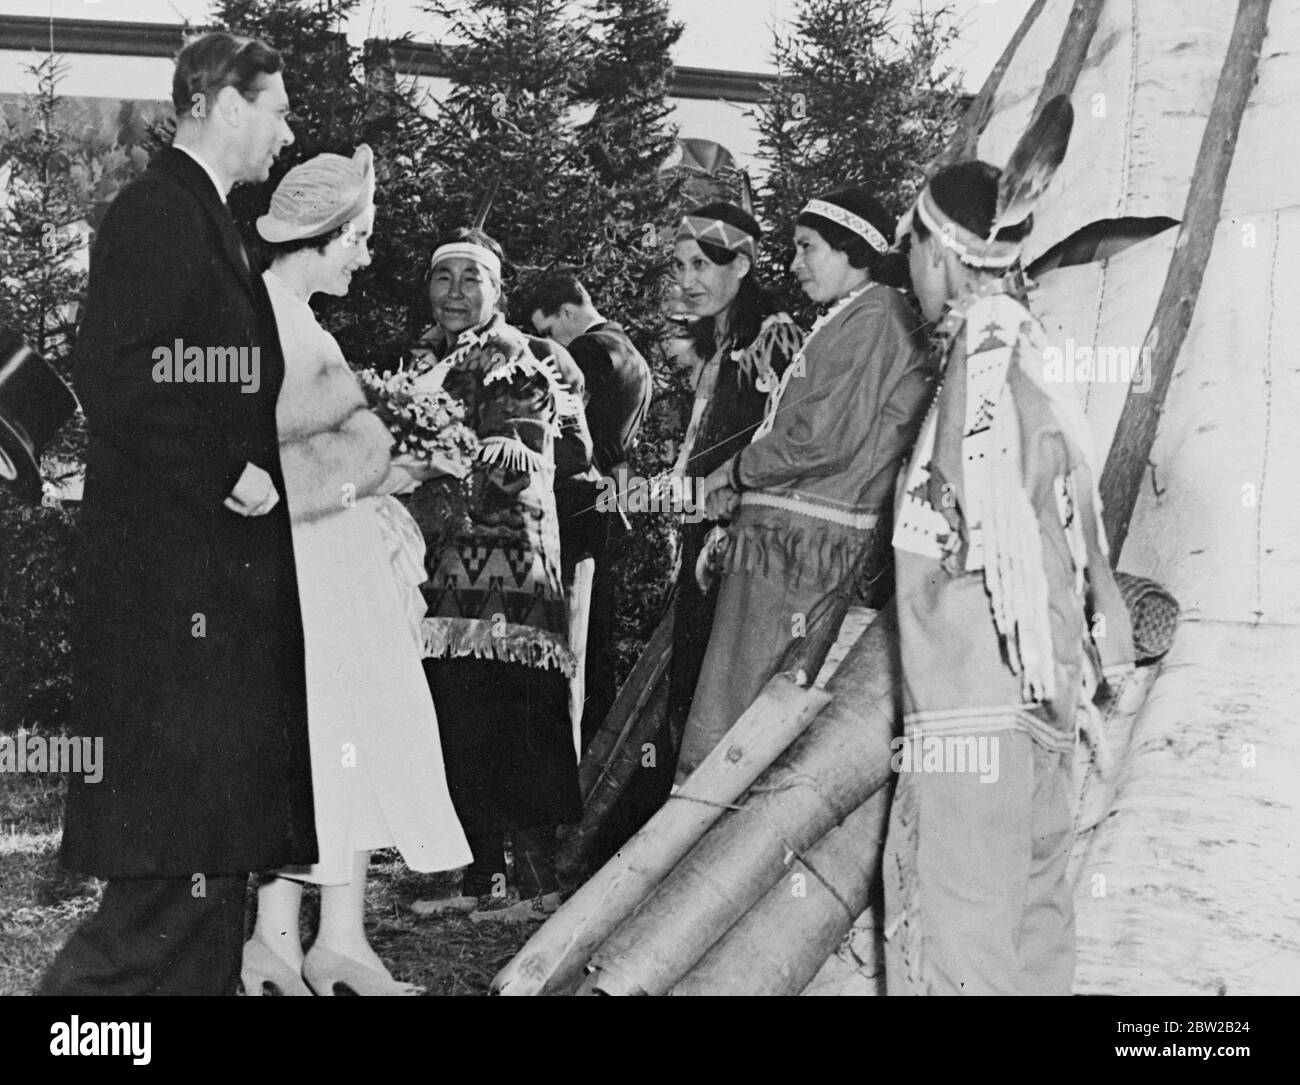 Original caption: The Royal Visit to Canada. The King and Queen visited the Ojibway Indians [Ojibwe / Ojibwa / Chippewa / First Nations] at the settlement which they made on the banks of the McIntyre River in the Port Arthur district of Ontario. Photo shows the King and Queen chatting to Indians who for the occasion discarded their modern clothes and wore tribal costumes and feathers. [Port Arthur, Fort William, Neebing formed the city of Thunder Bay in 1970s] 31 May 1939 Stock Photo